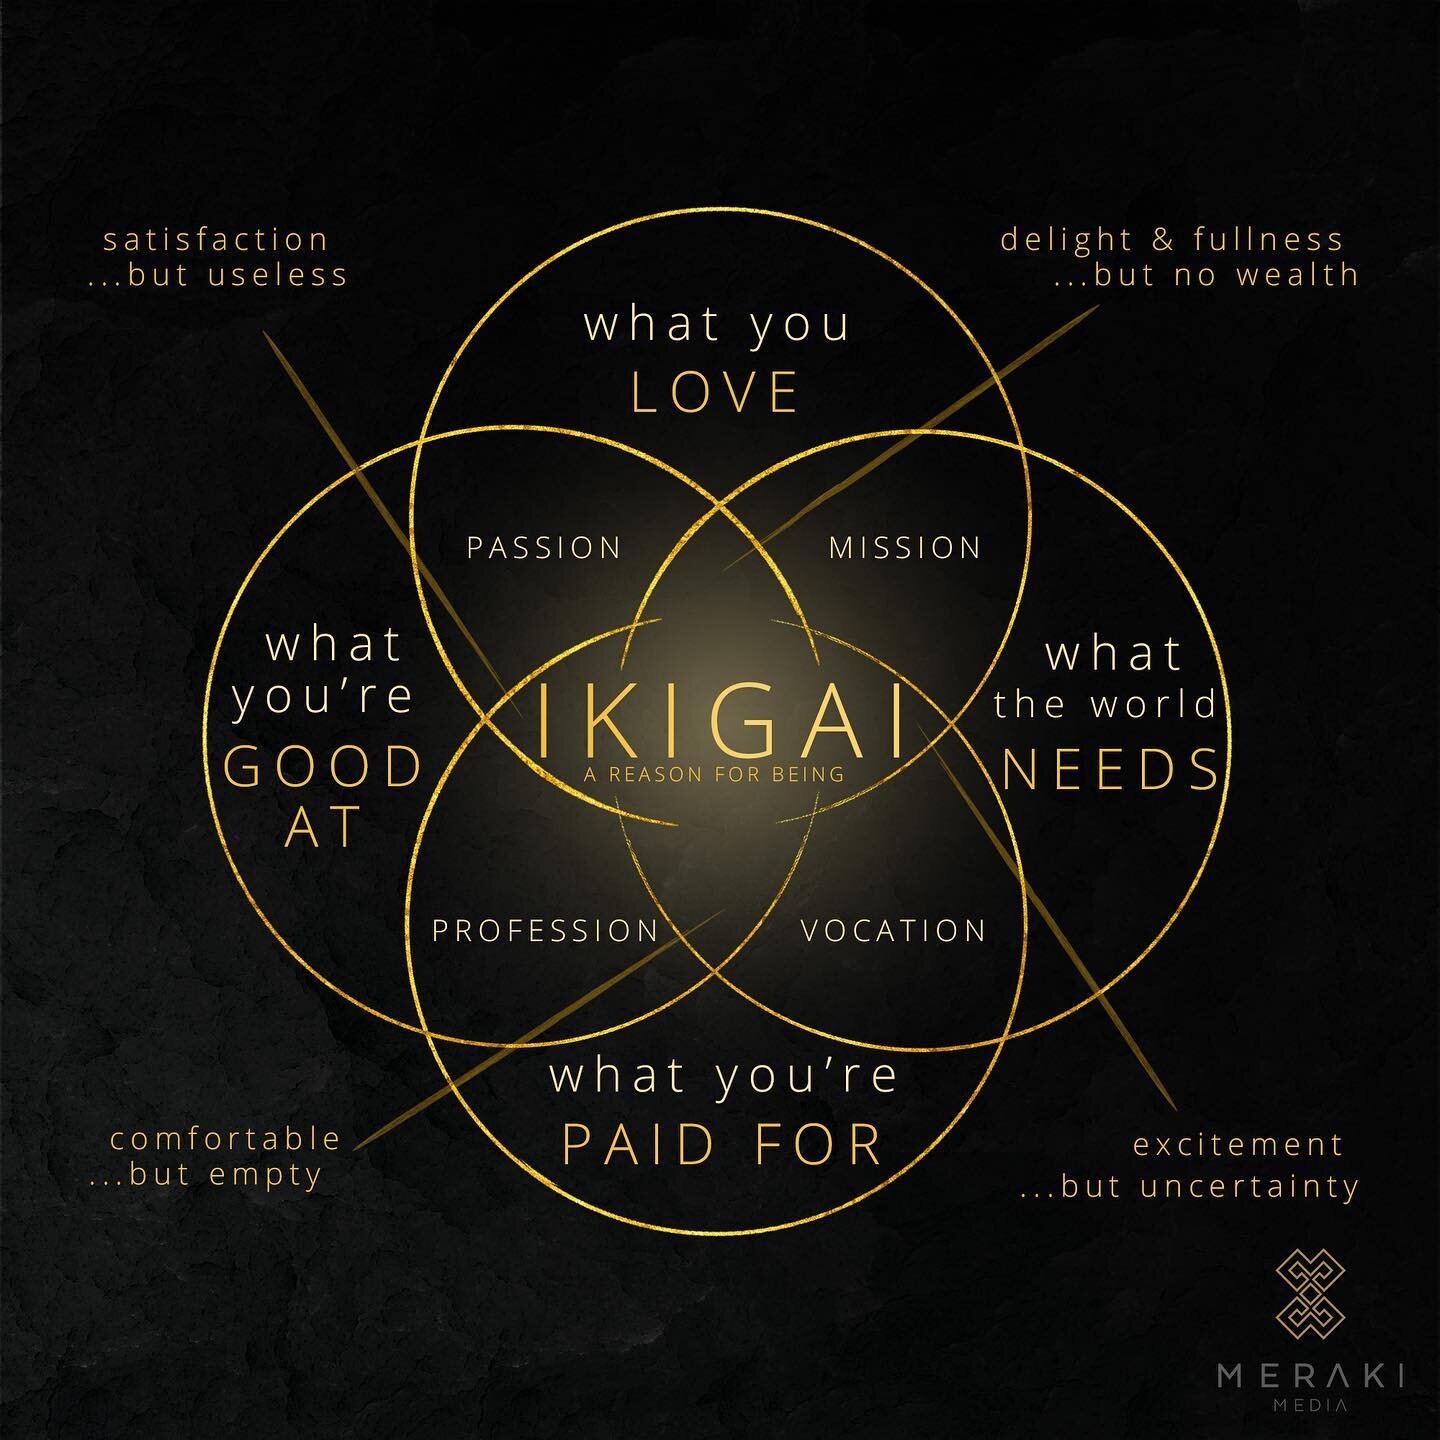 Ikigai (ee-key-guy) is an ancient Japanese philosophy that means: &ldquo;Your reason for being&rdquo;

It is the cross-section of:
1. What you love to do
2. What the world needs
3. What you&rsquo;re good at
4. What you can get paid for

If you can cr